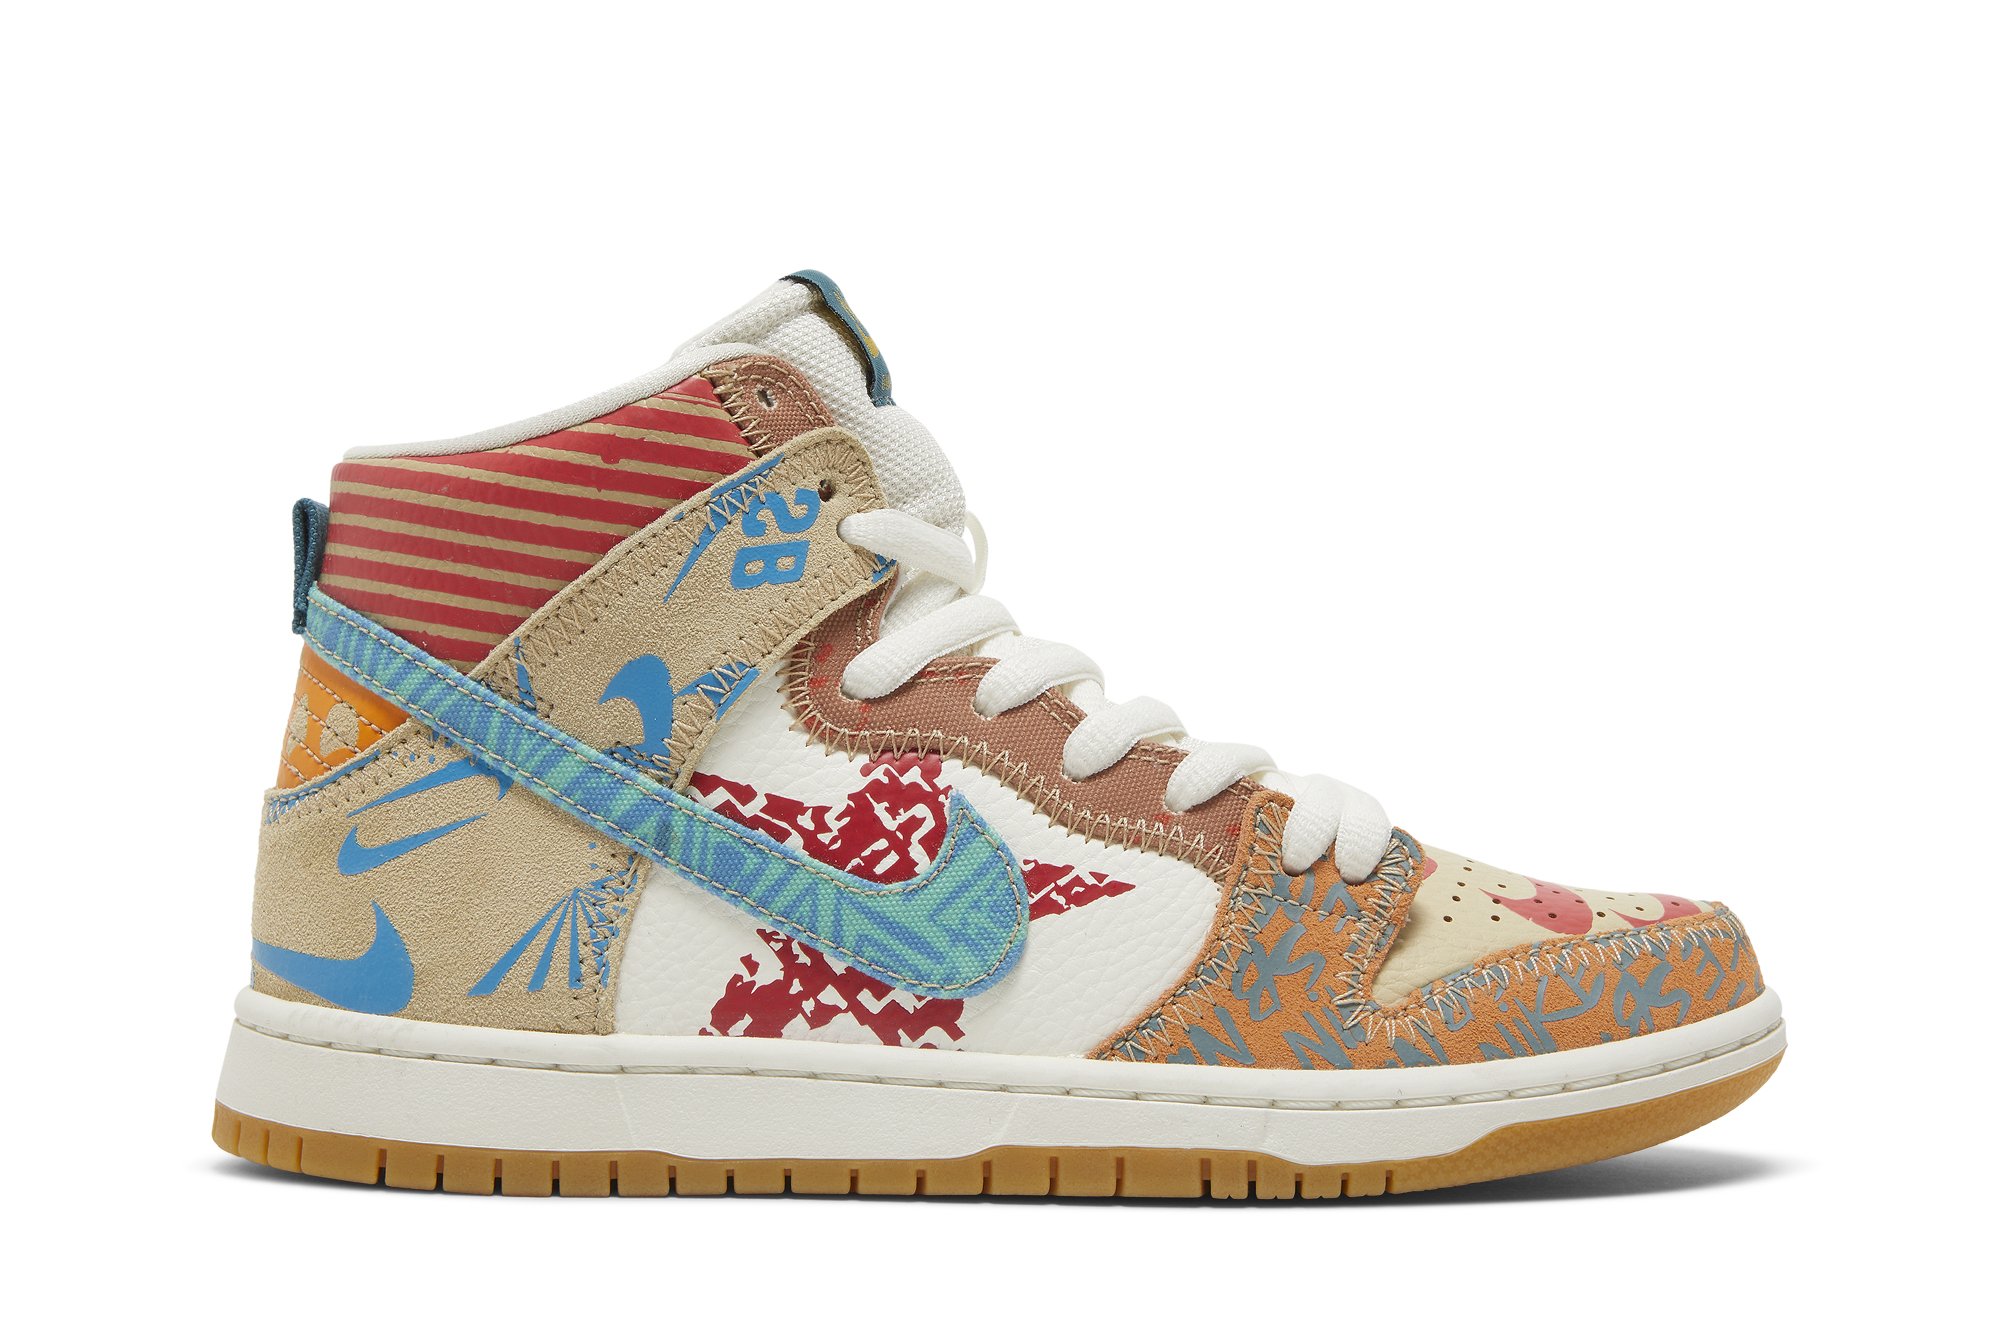 Thomas Campbell x SB Dunk High 'What The'